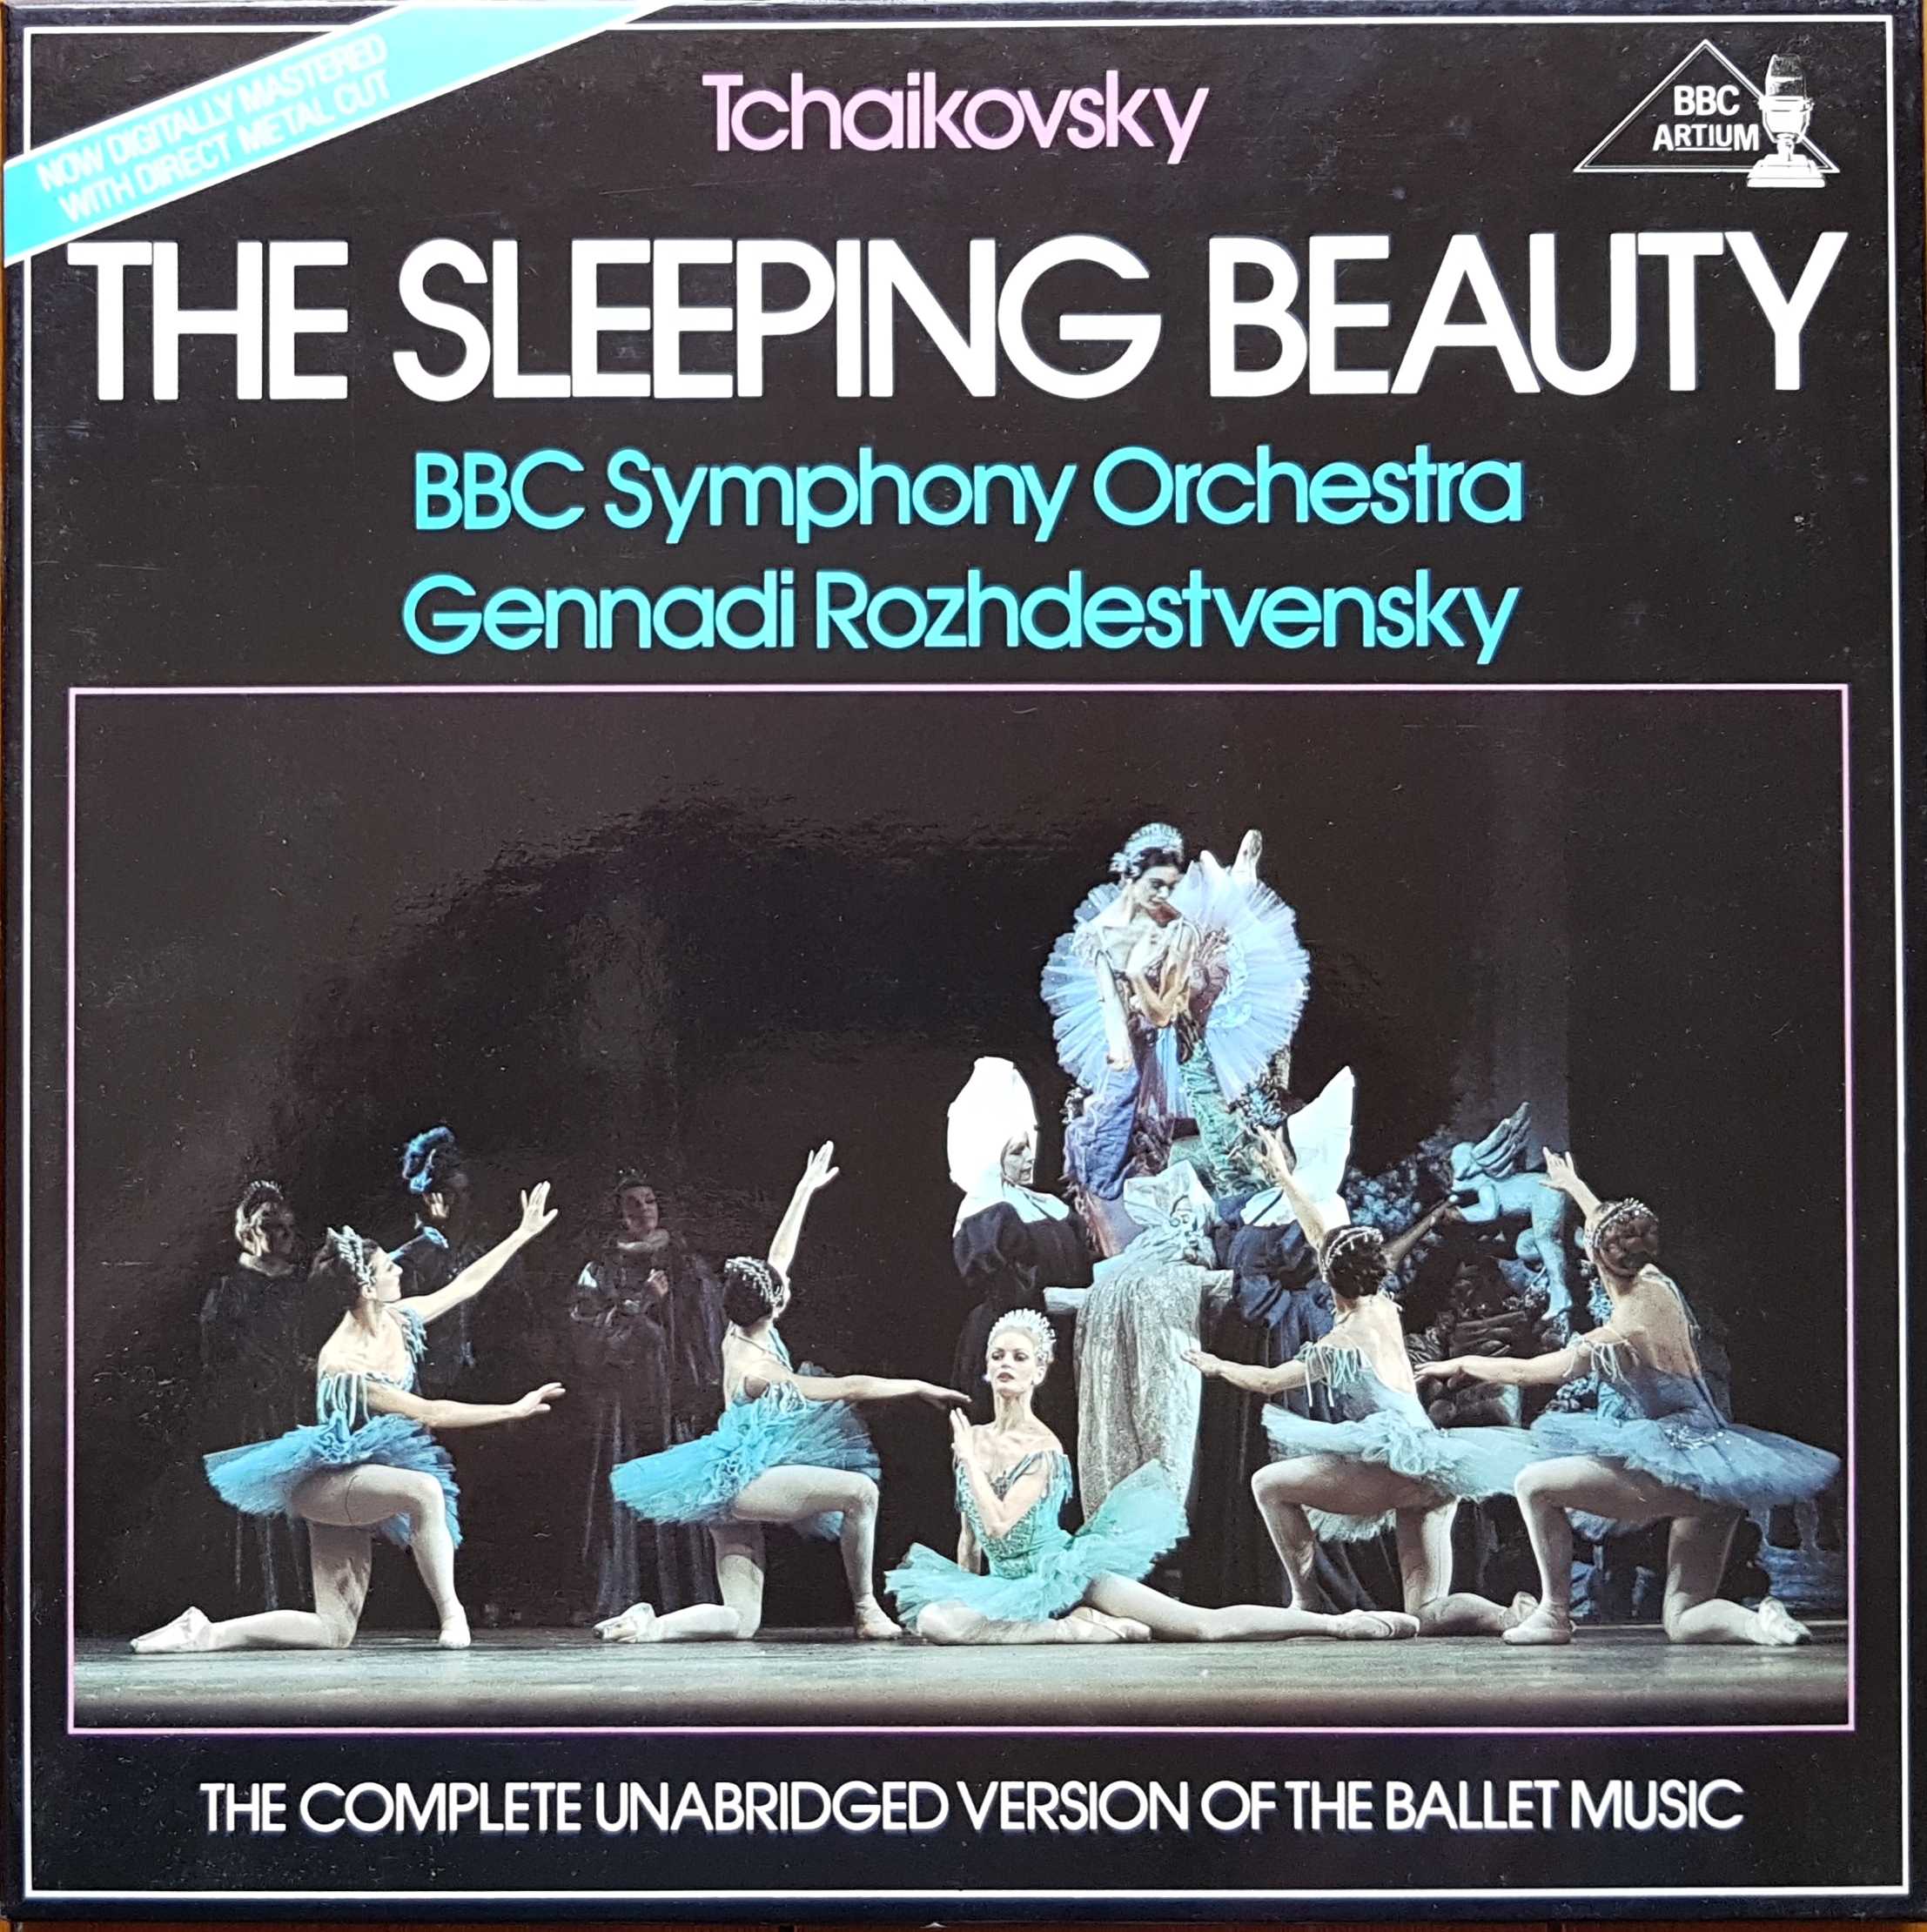 Picture of BBC 3003 The sleeping beauty by artist Tchaikovsky from the BBC albums - Records and Tapes library